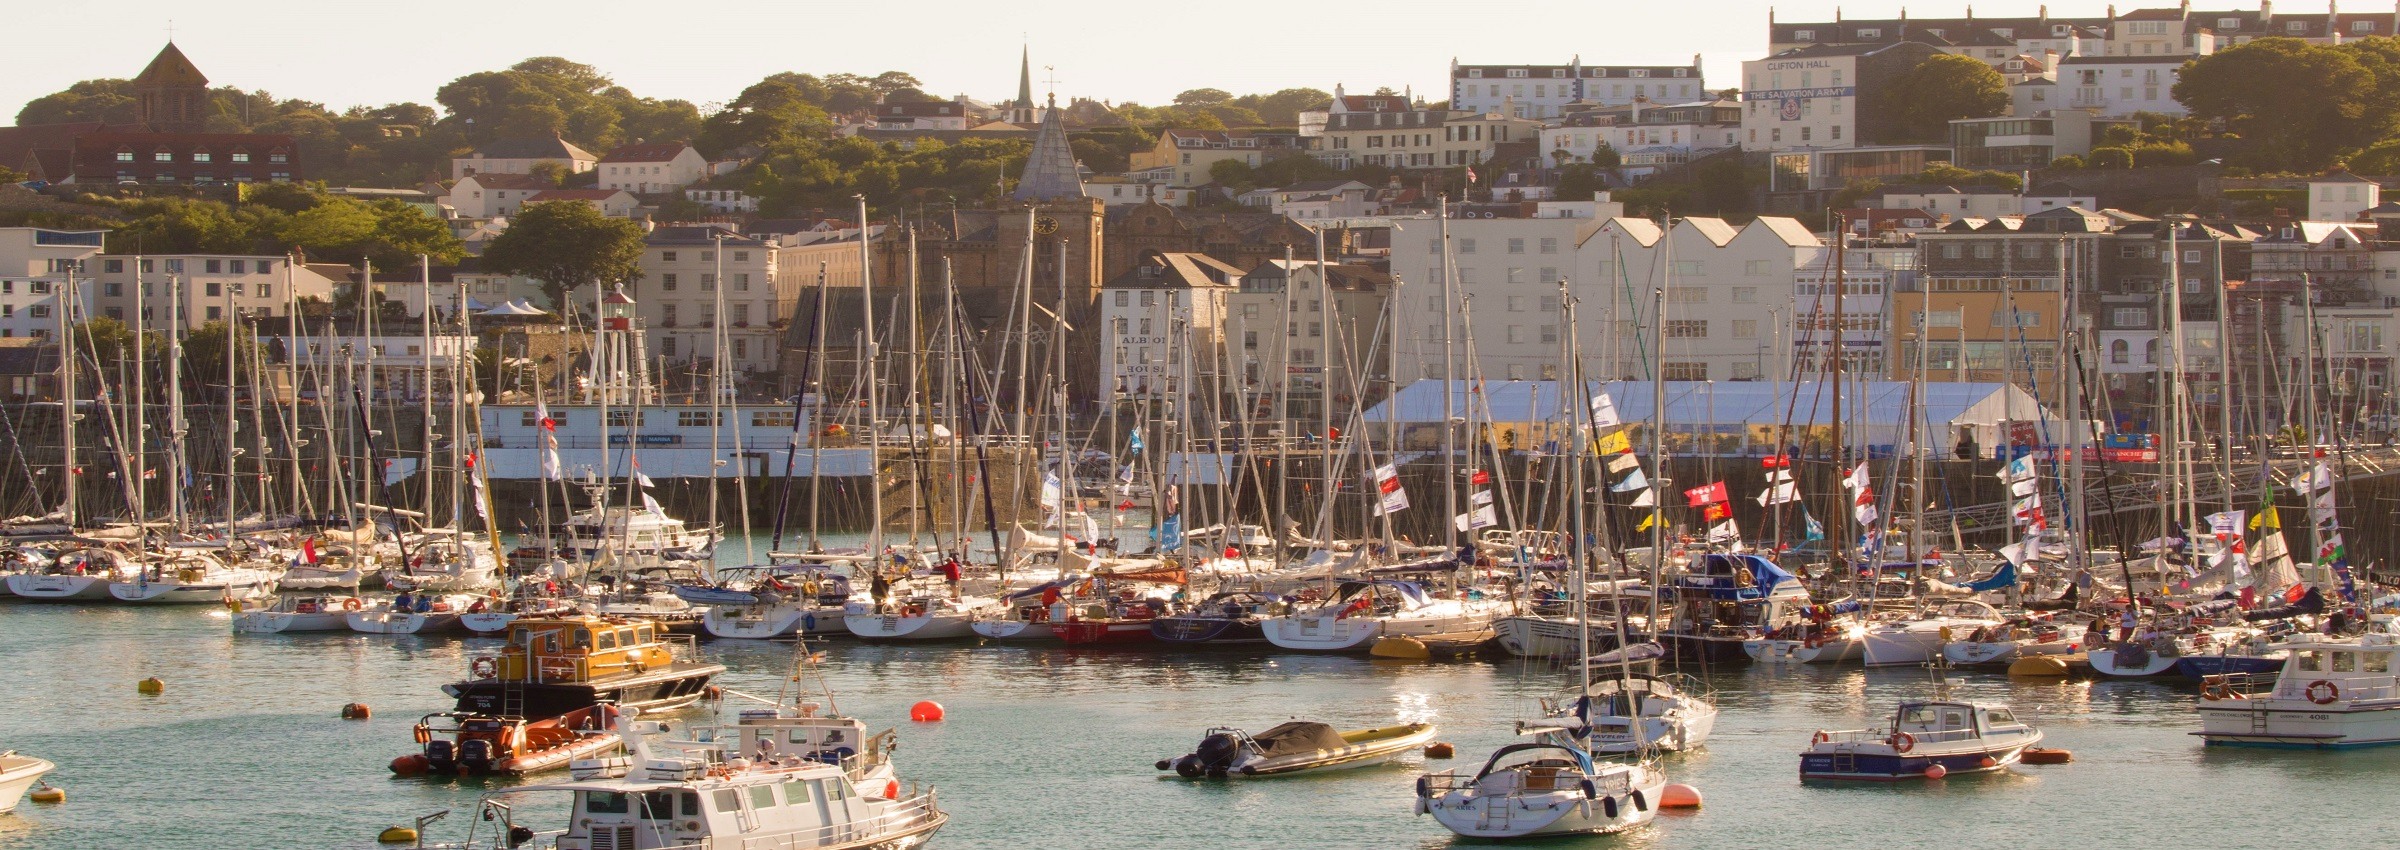 View of St Peter Port seafront on Guernsey